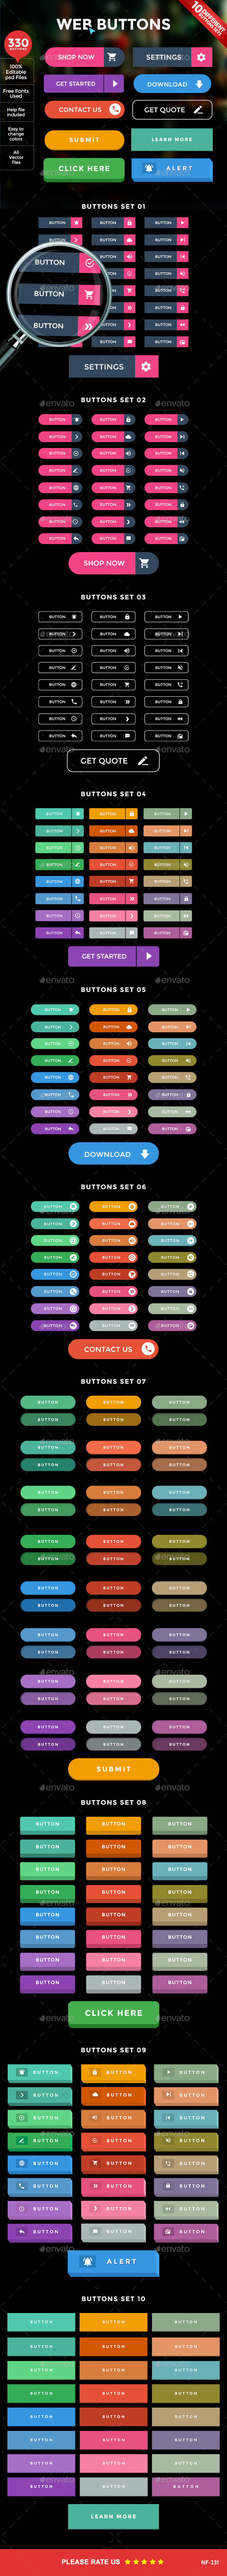 Nf 231 web buttons preview